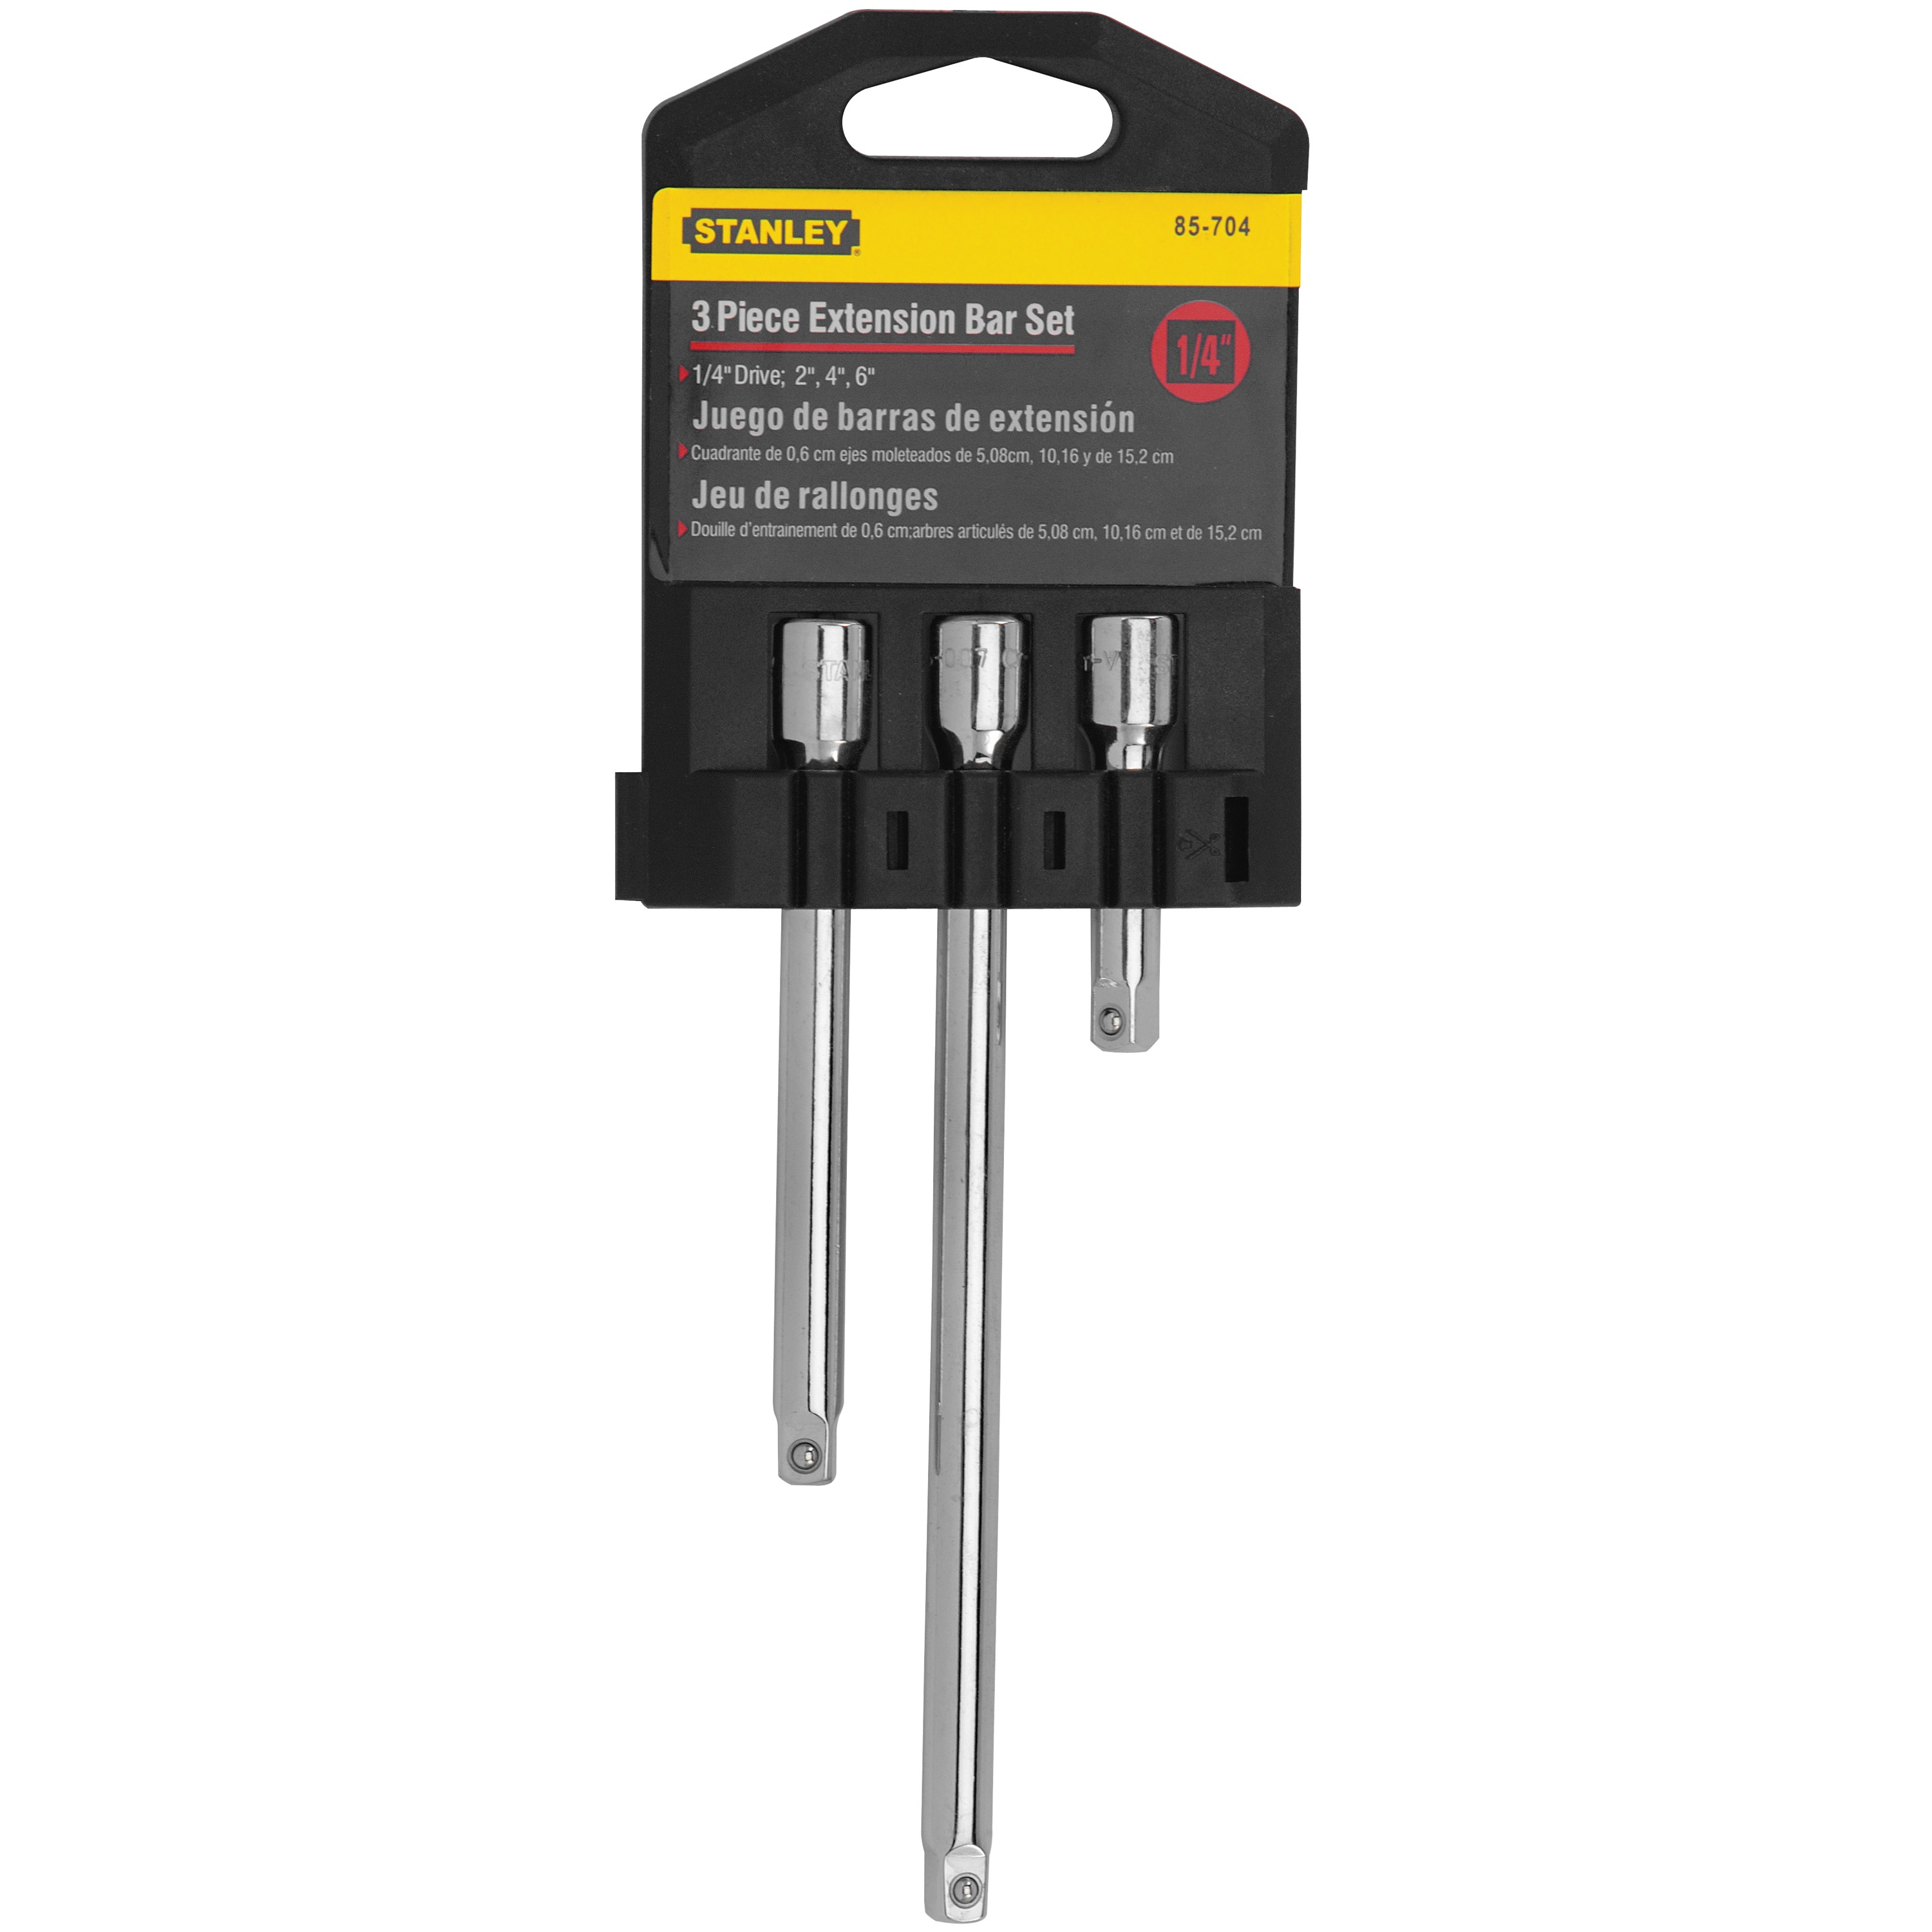 Stanley Tools - 3 pc Extension Bar Set - 85-704